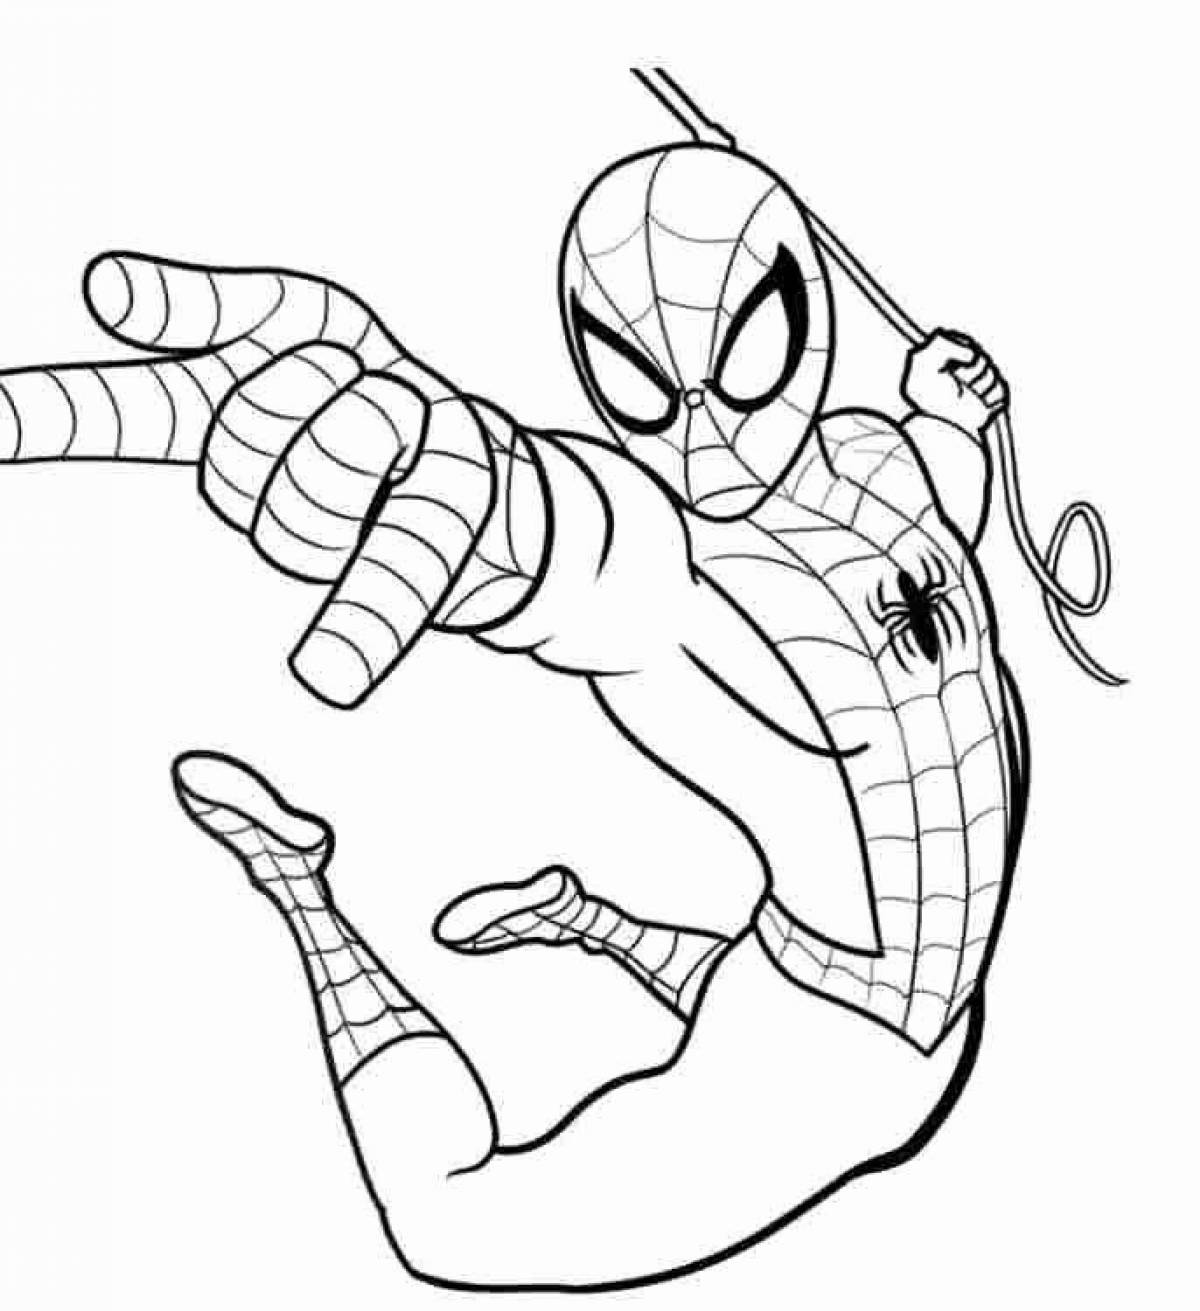 Detailed Spiderman Coloring Page